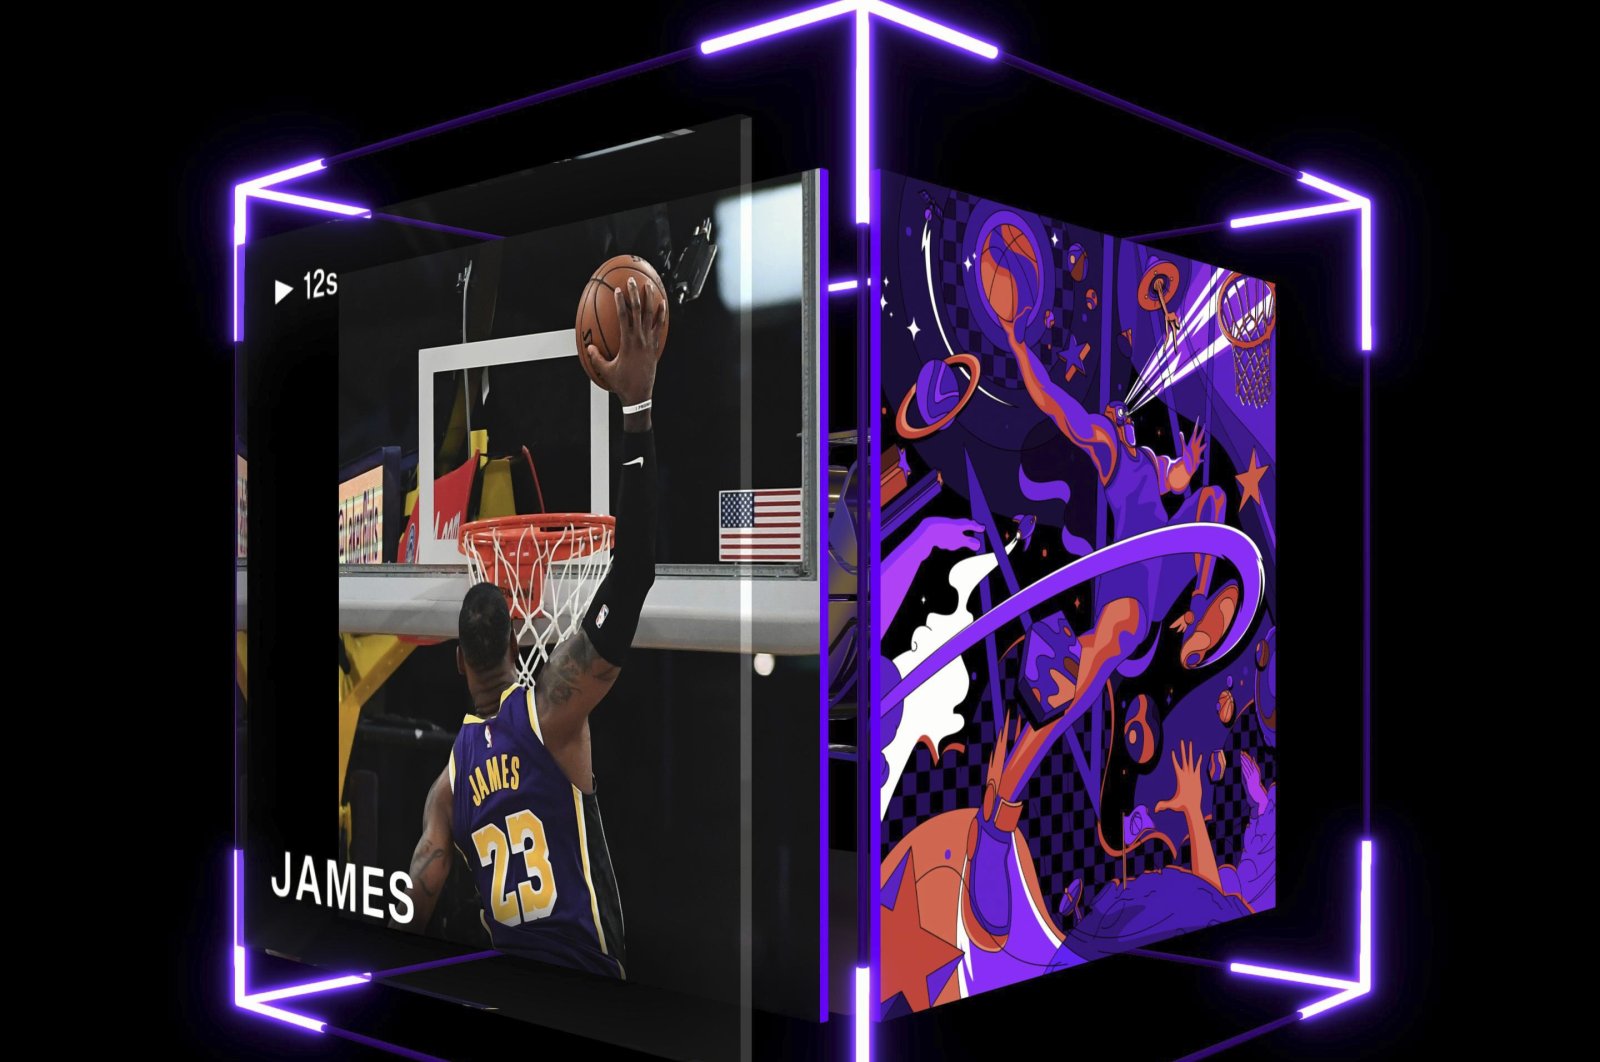 This image provided by Dapper Labs shows a LeBron James digital trading card. (Dapper Labs via AP)